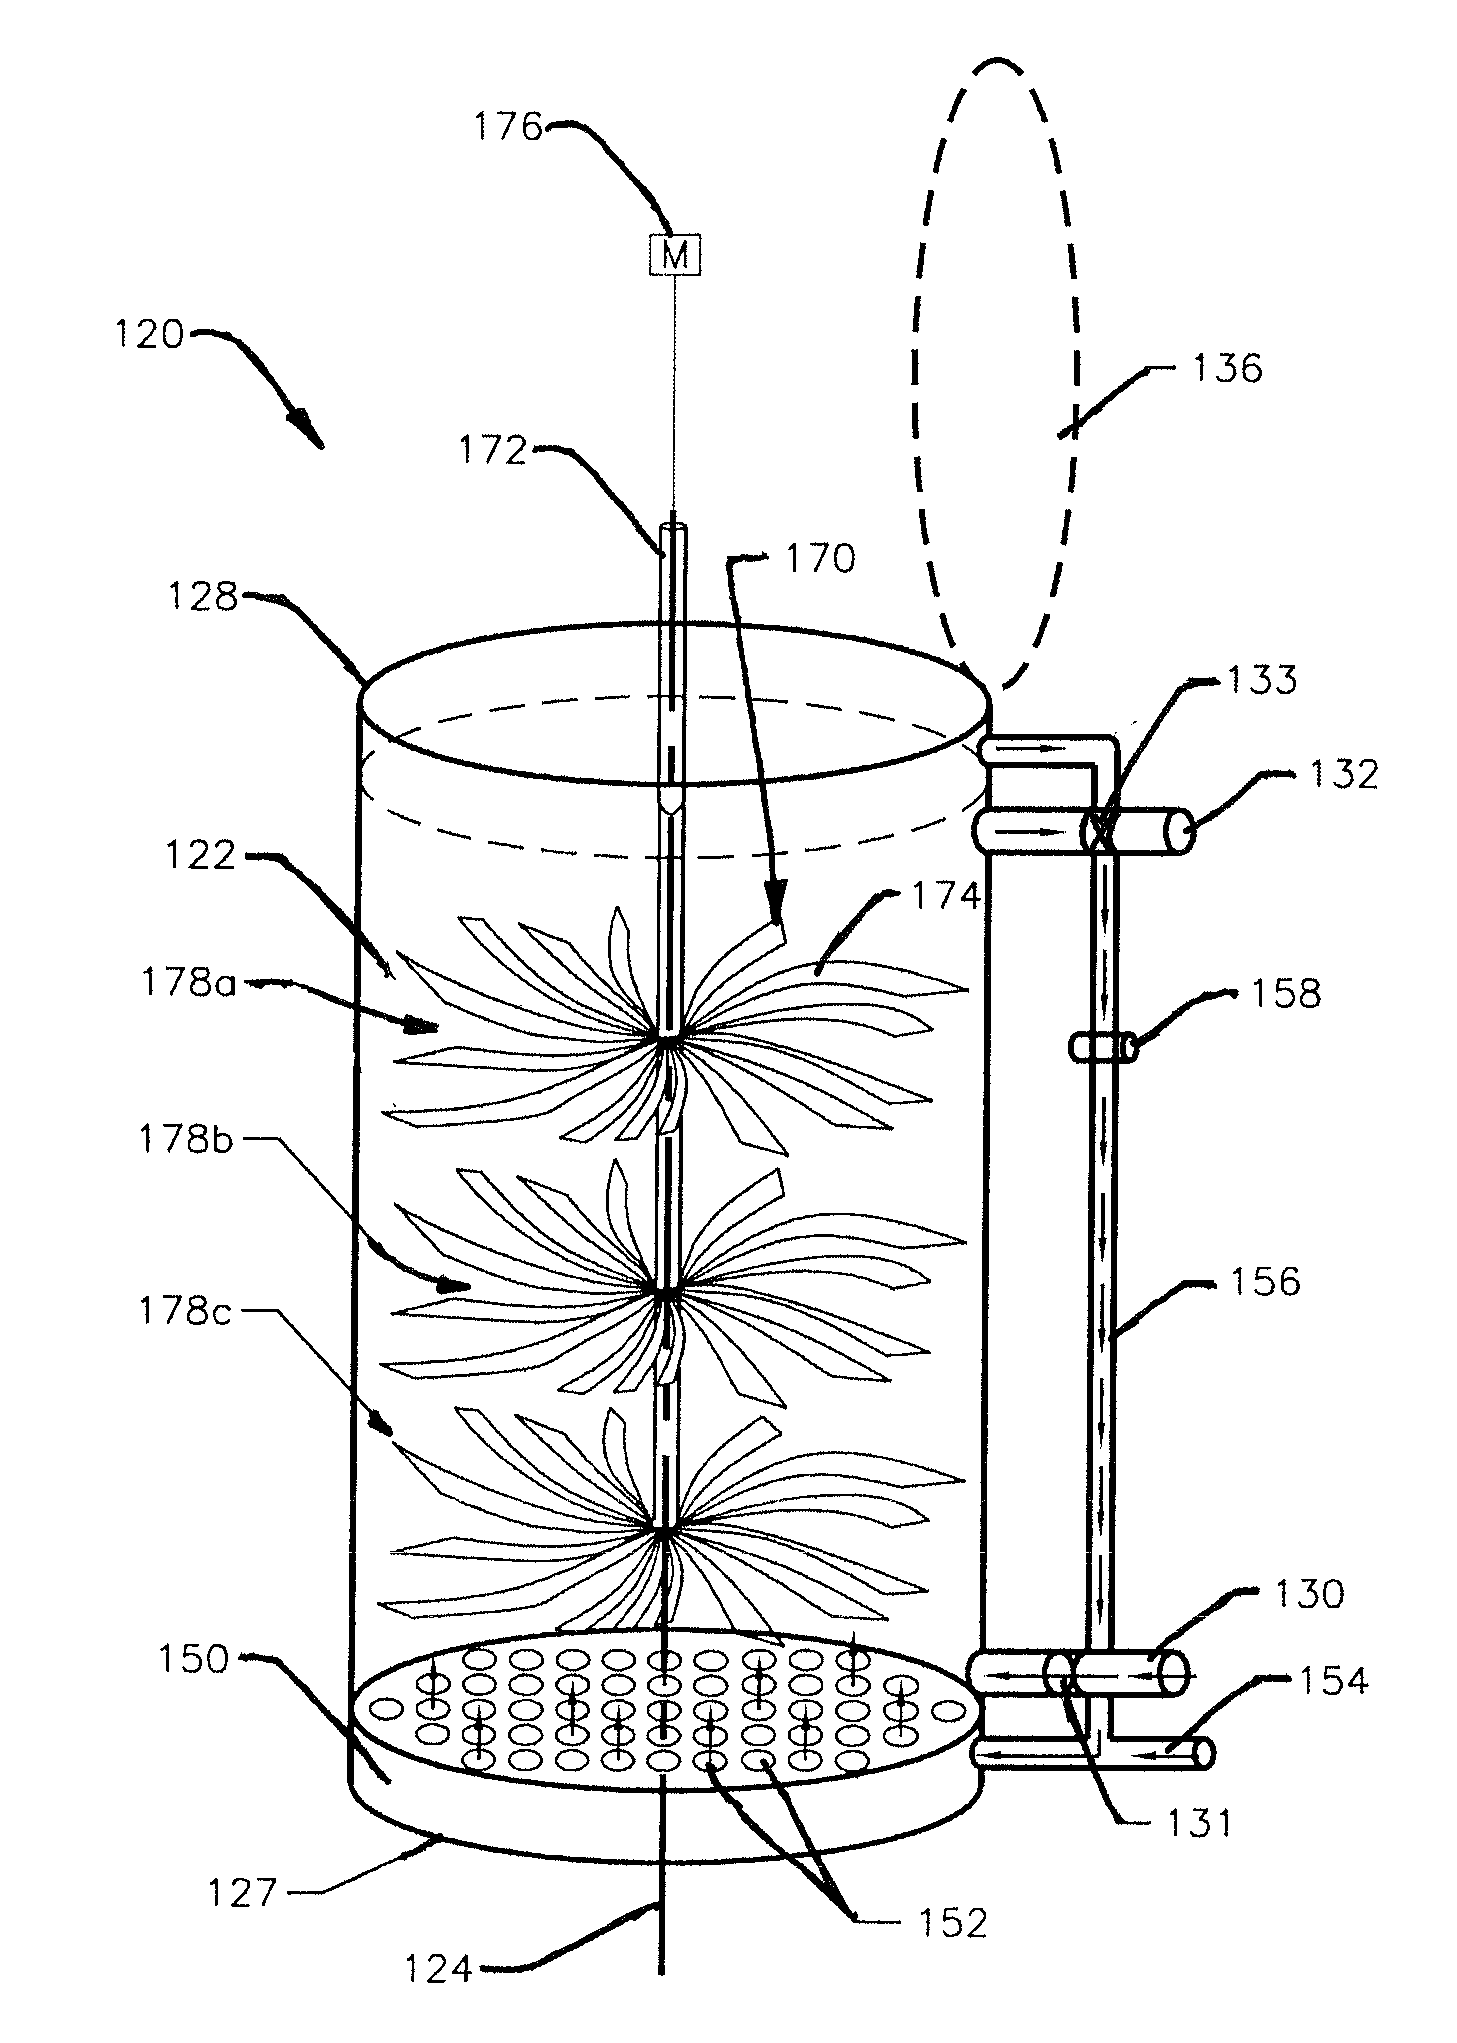 Apparatus and Method for Cultivating Algae